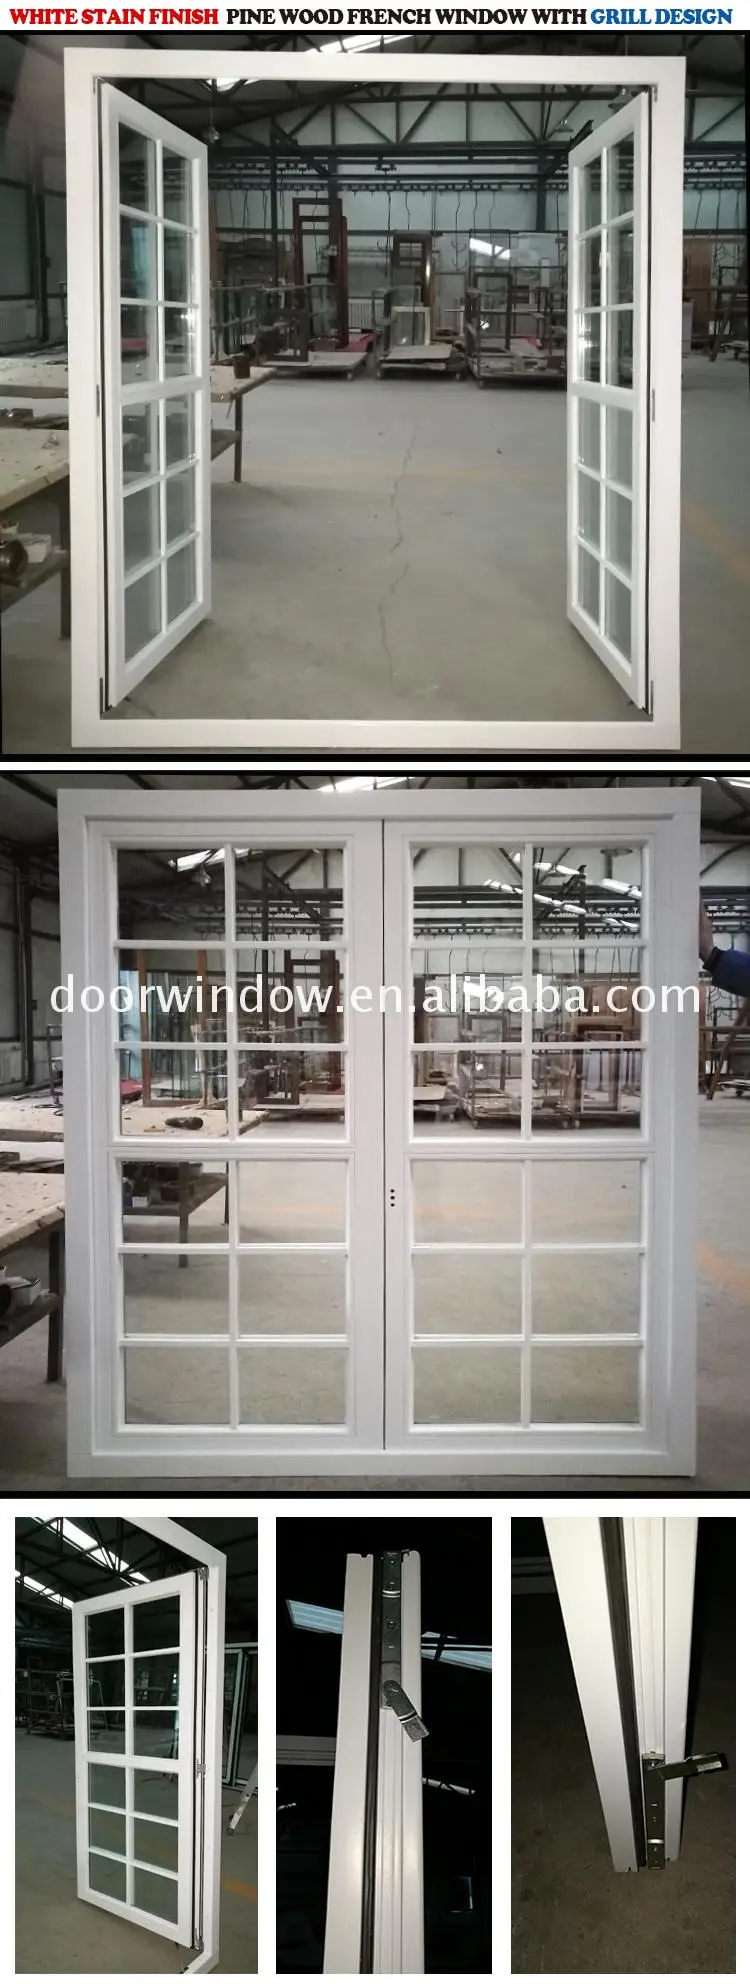 Windows model in house window grill design with and mosquito net grills pictures